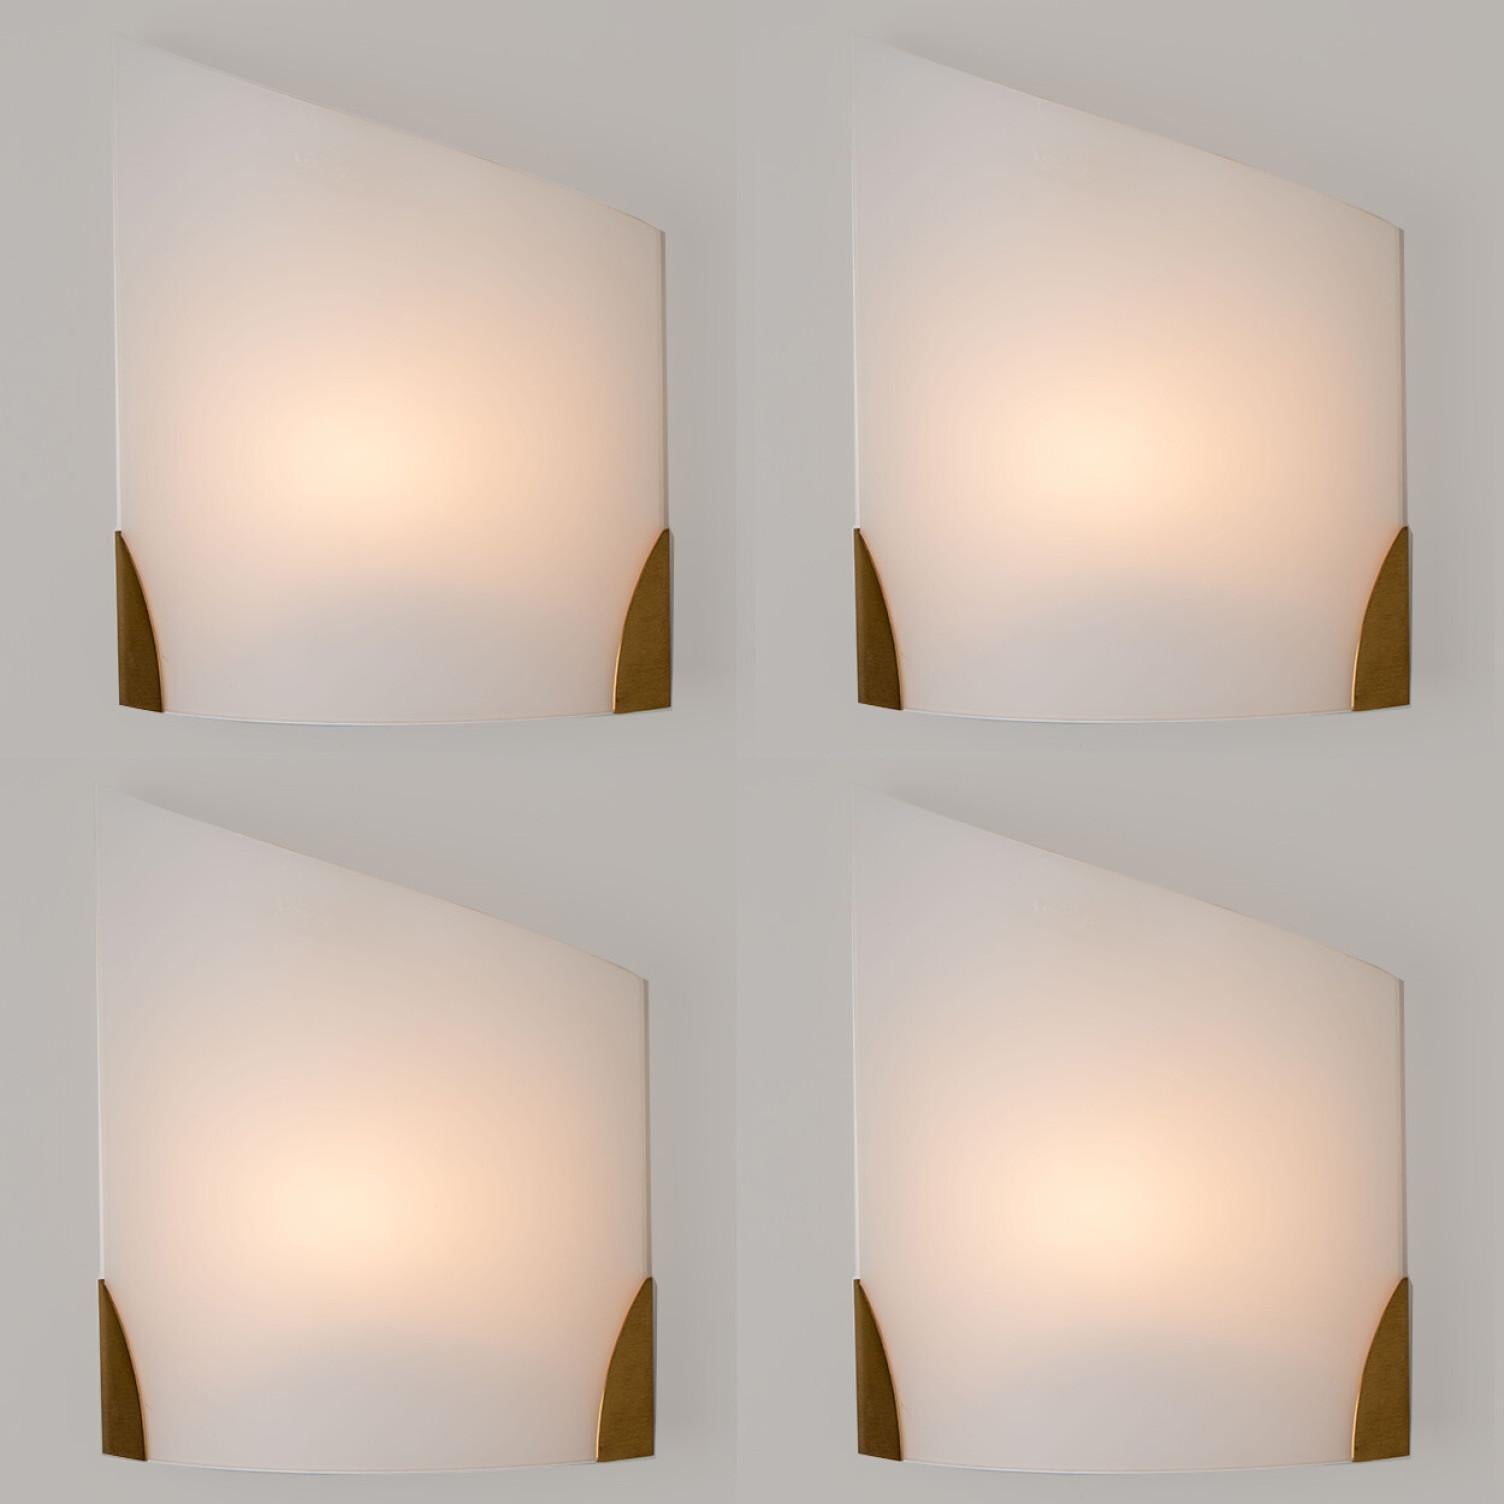 1 of 4 Cylinder Shaped White Opaque Glass Wall Lights by Glashütte Limburg For Sale 1